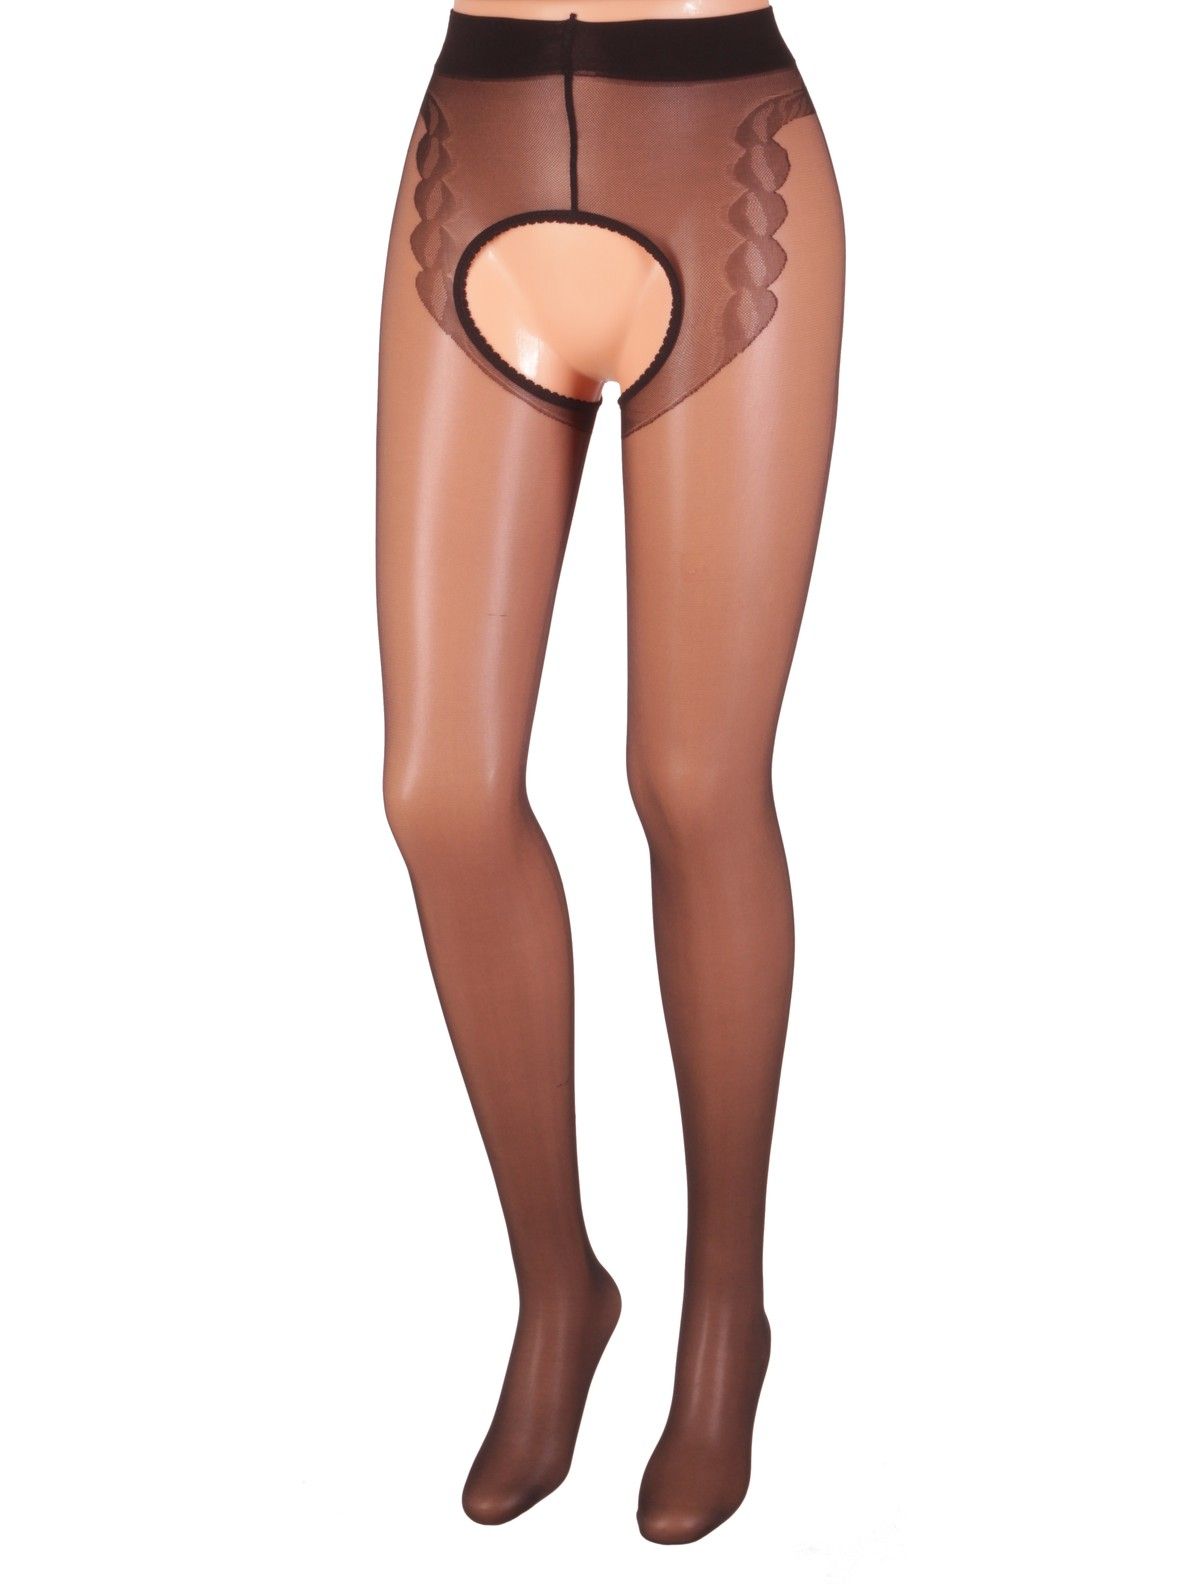 Pantyhose with extra large cotton crotch gusset